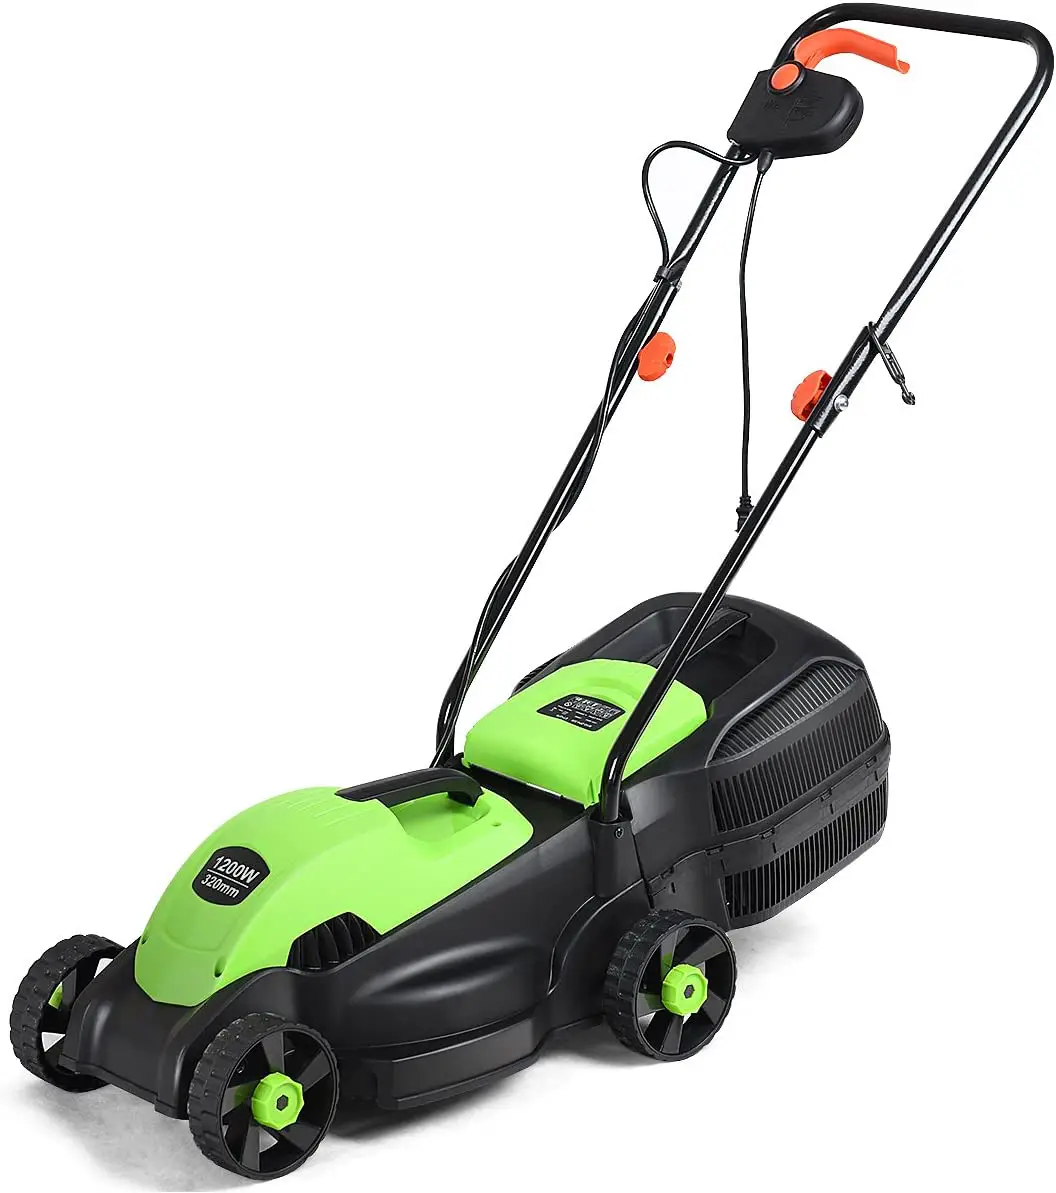 10 Best Lawn Mower For Small Yard